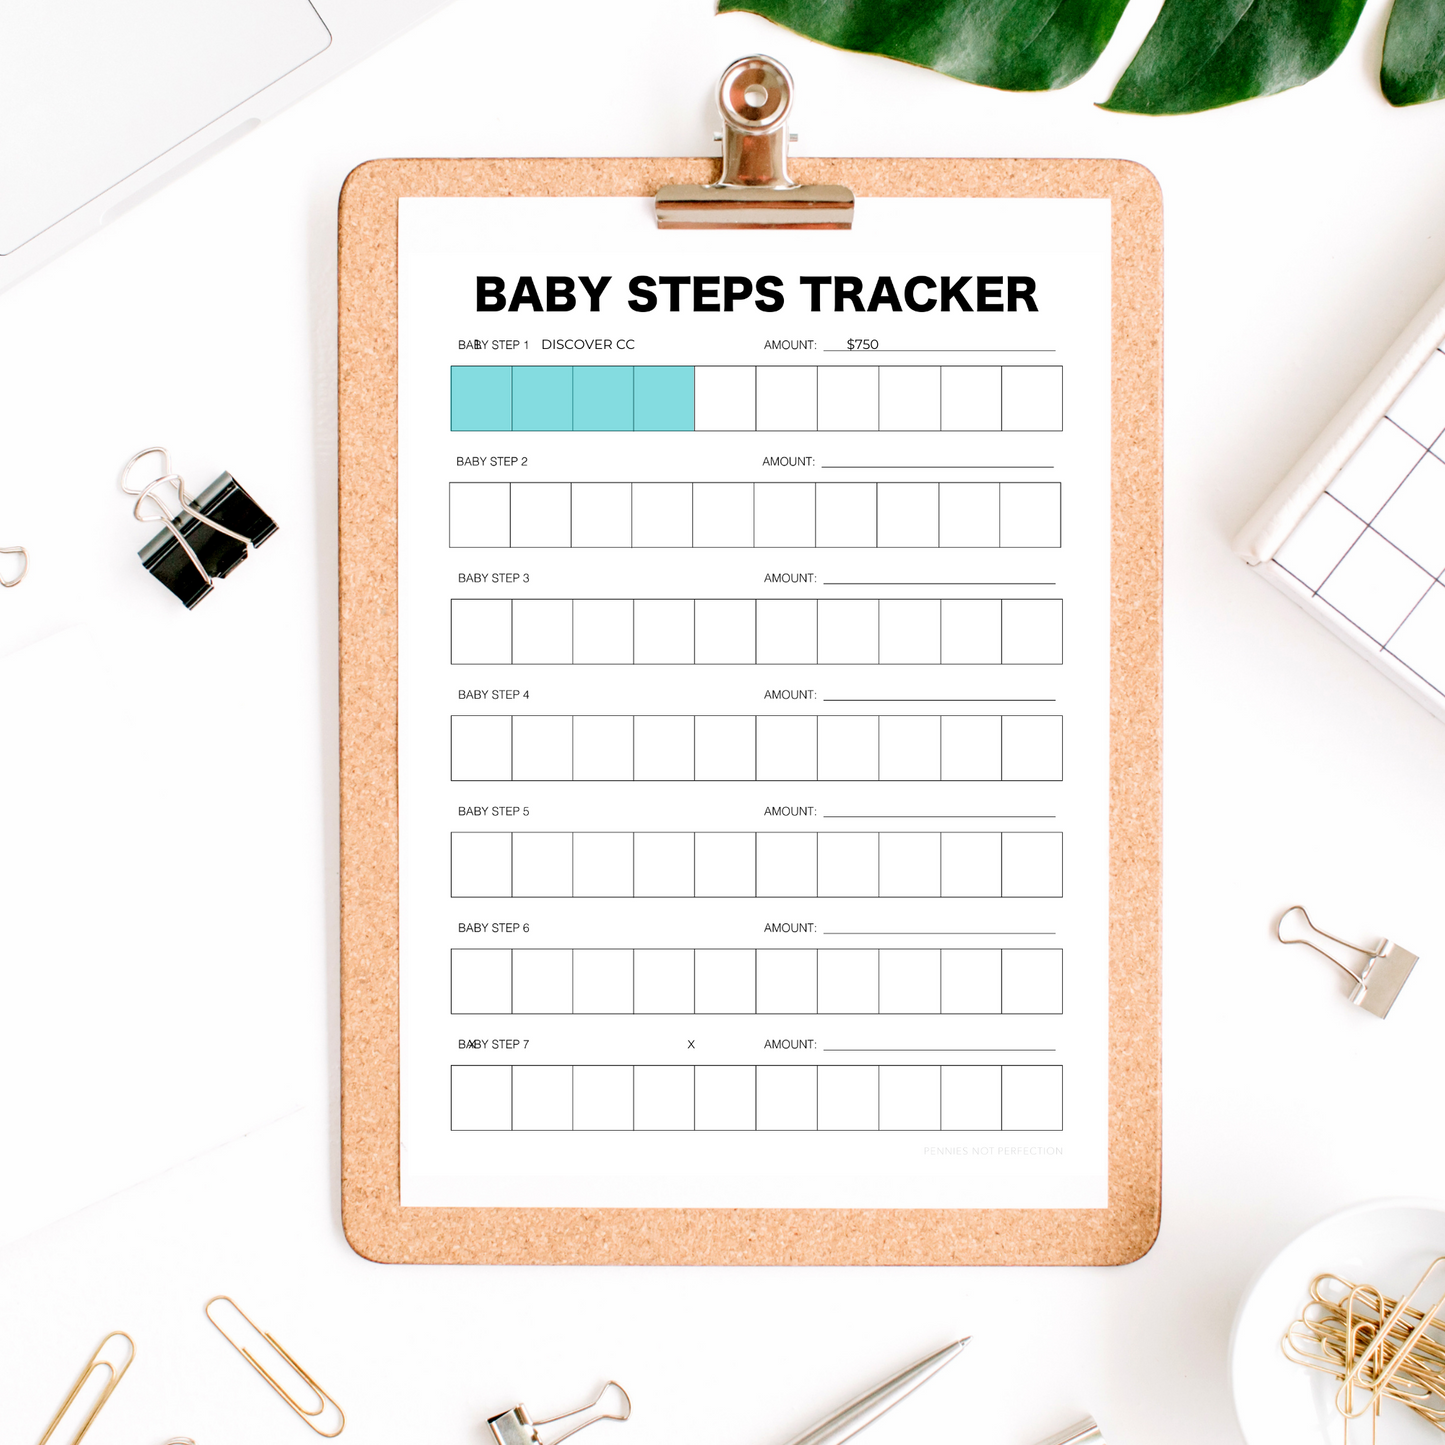 7 Baby Steps Tracker To Pay Off Debt & Build Wealth